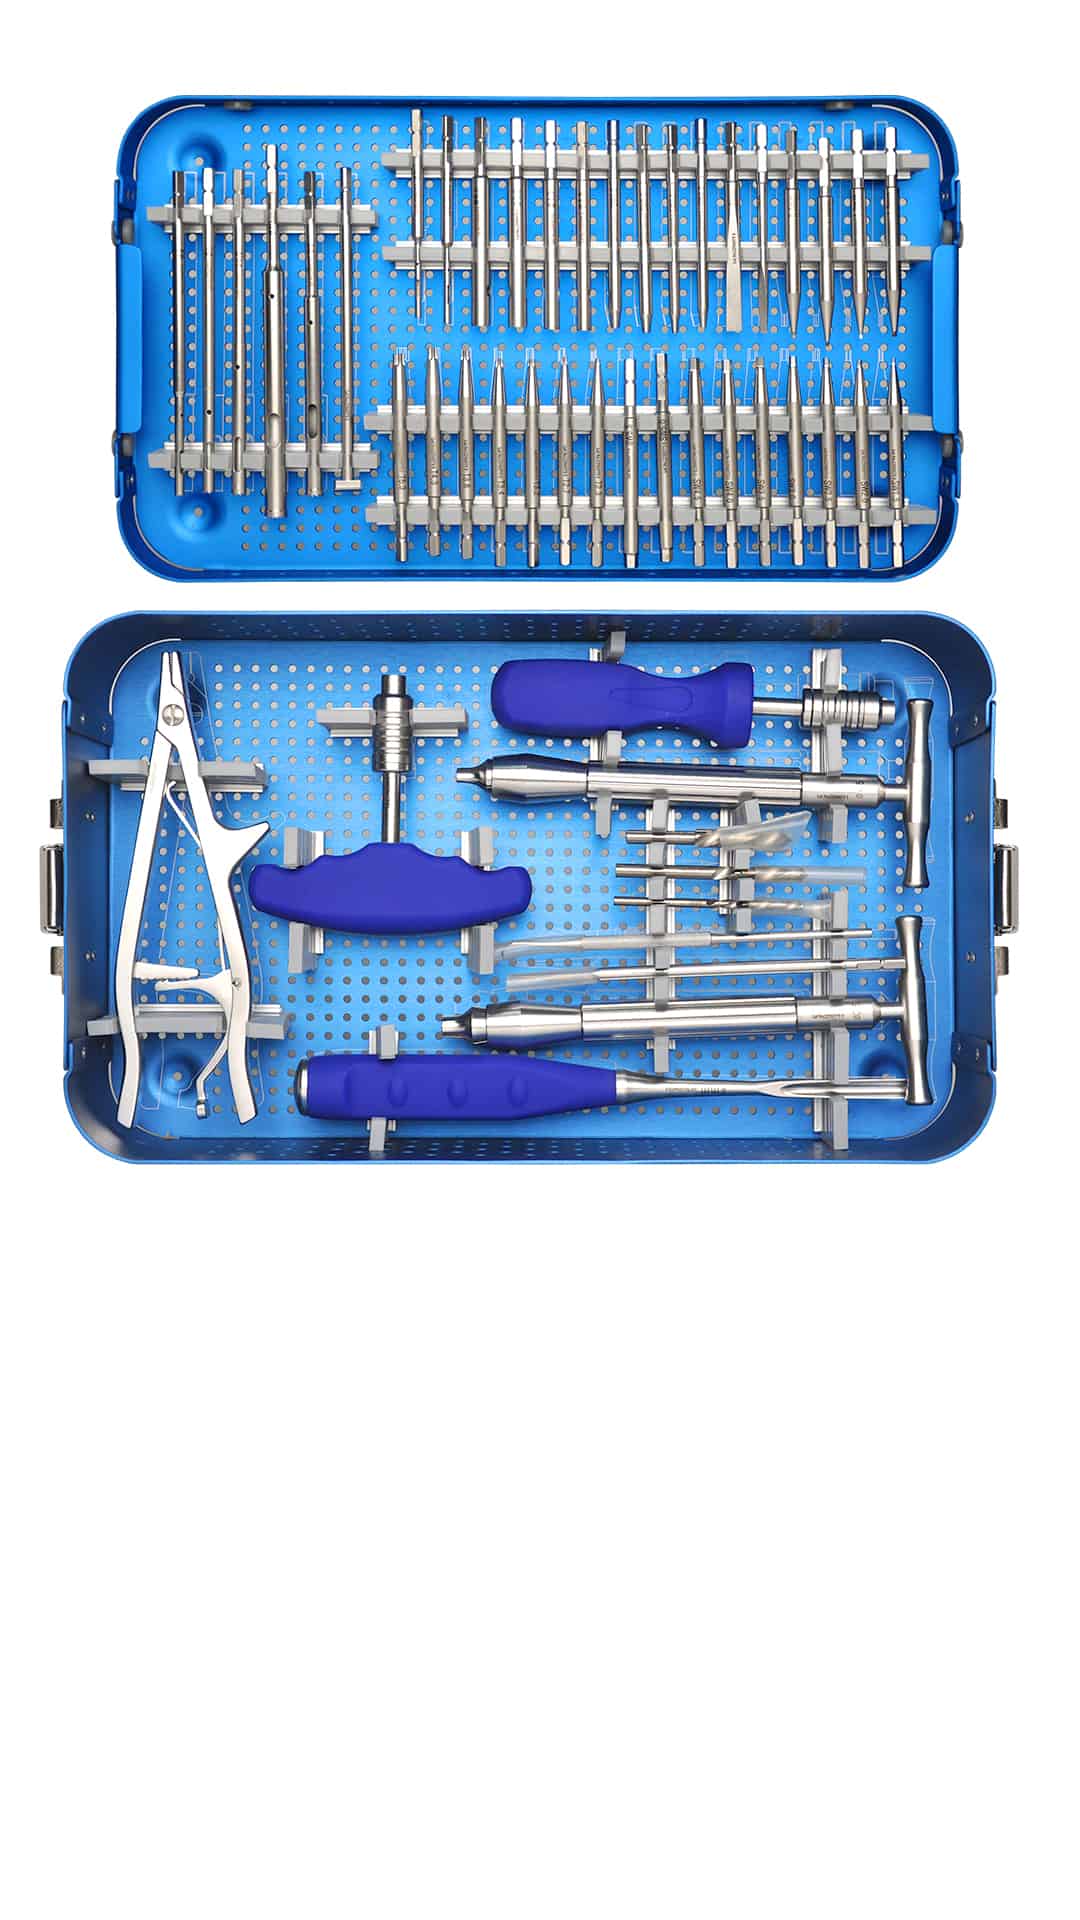 SCREW REMOVAL SURGERY INSTRUMENT SET - ORTIMPLANT